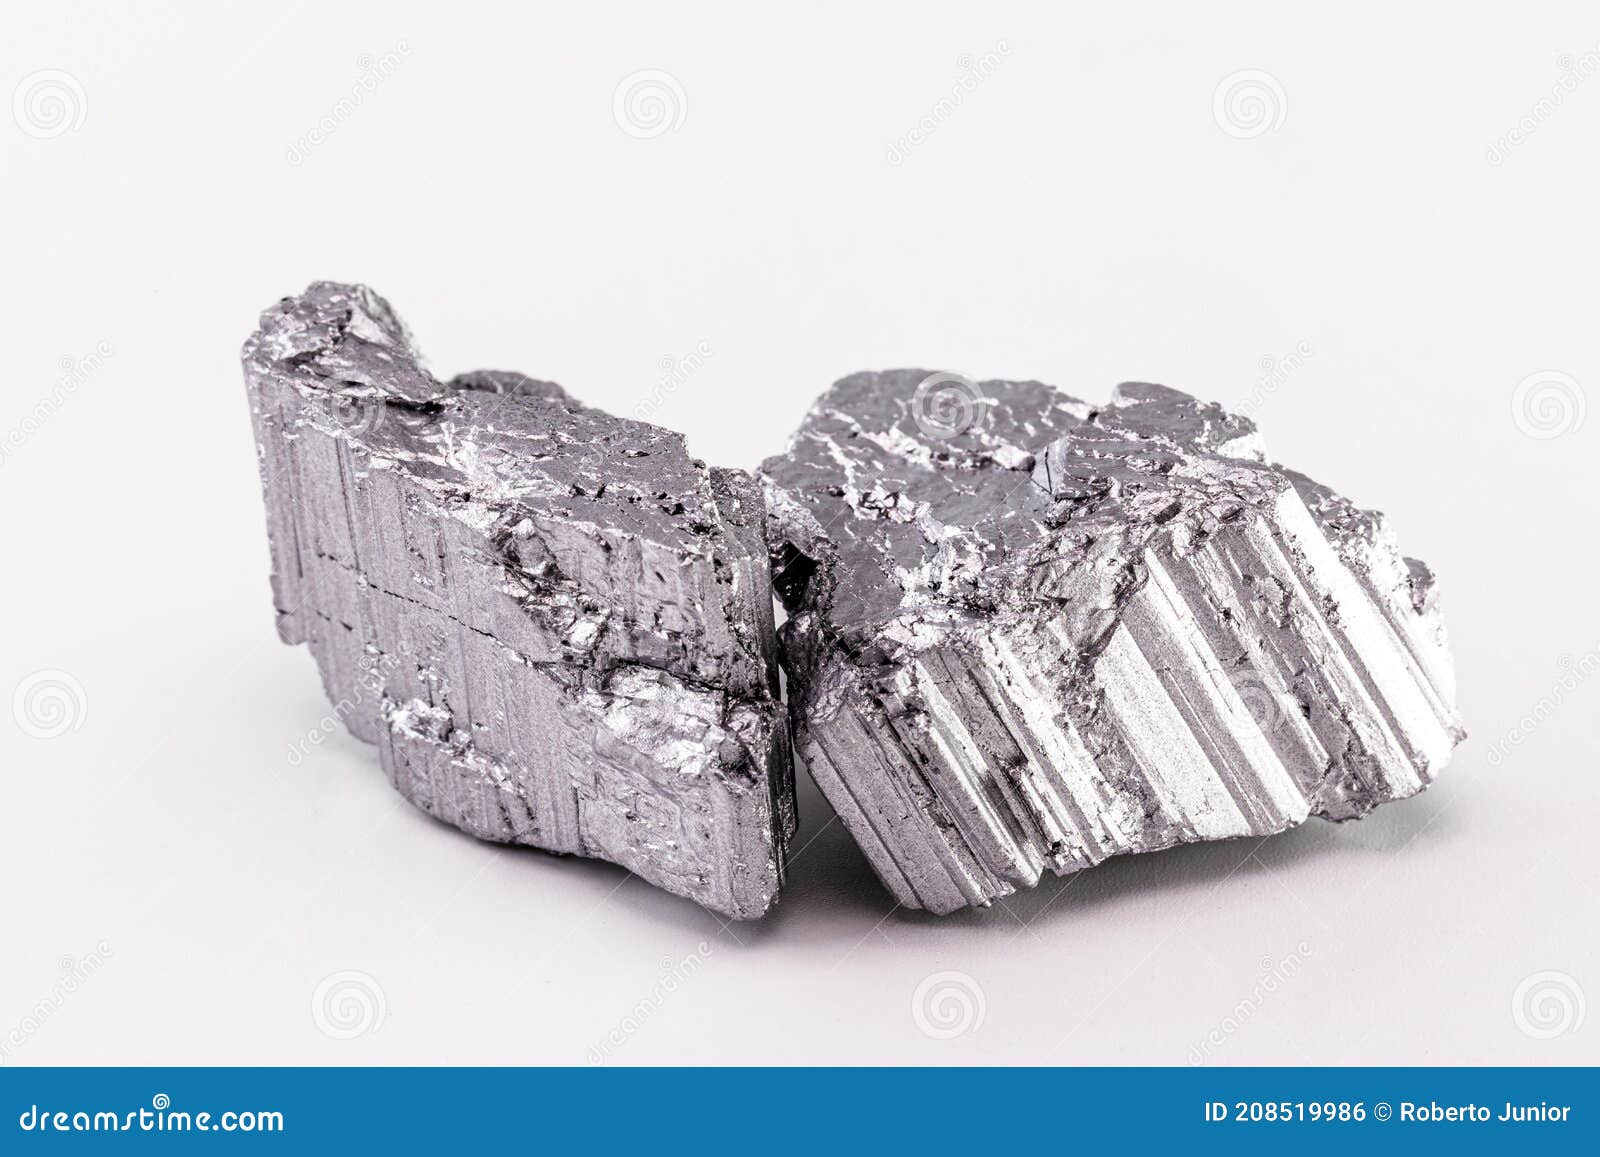 Neodymium Stone Part of Rare Earth Group World S Strongest Magnetic Ore Used in the Technology Industry Stock - Image of macro, chemistry: 208519986